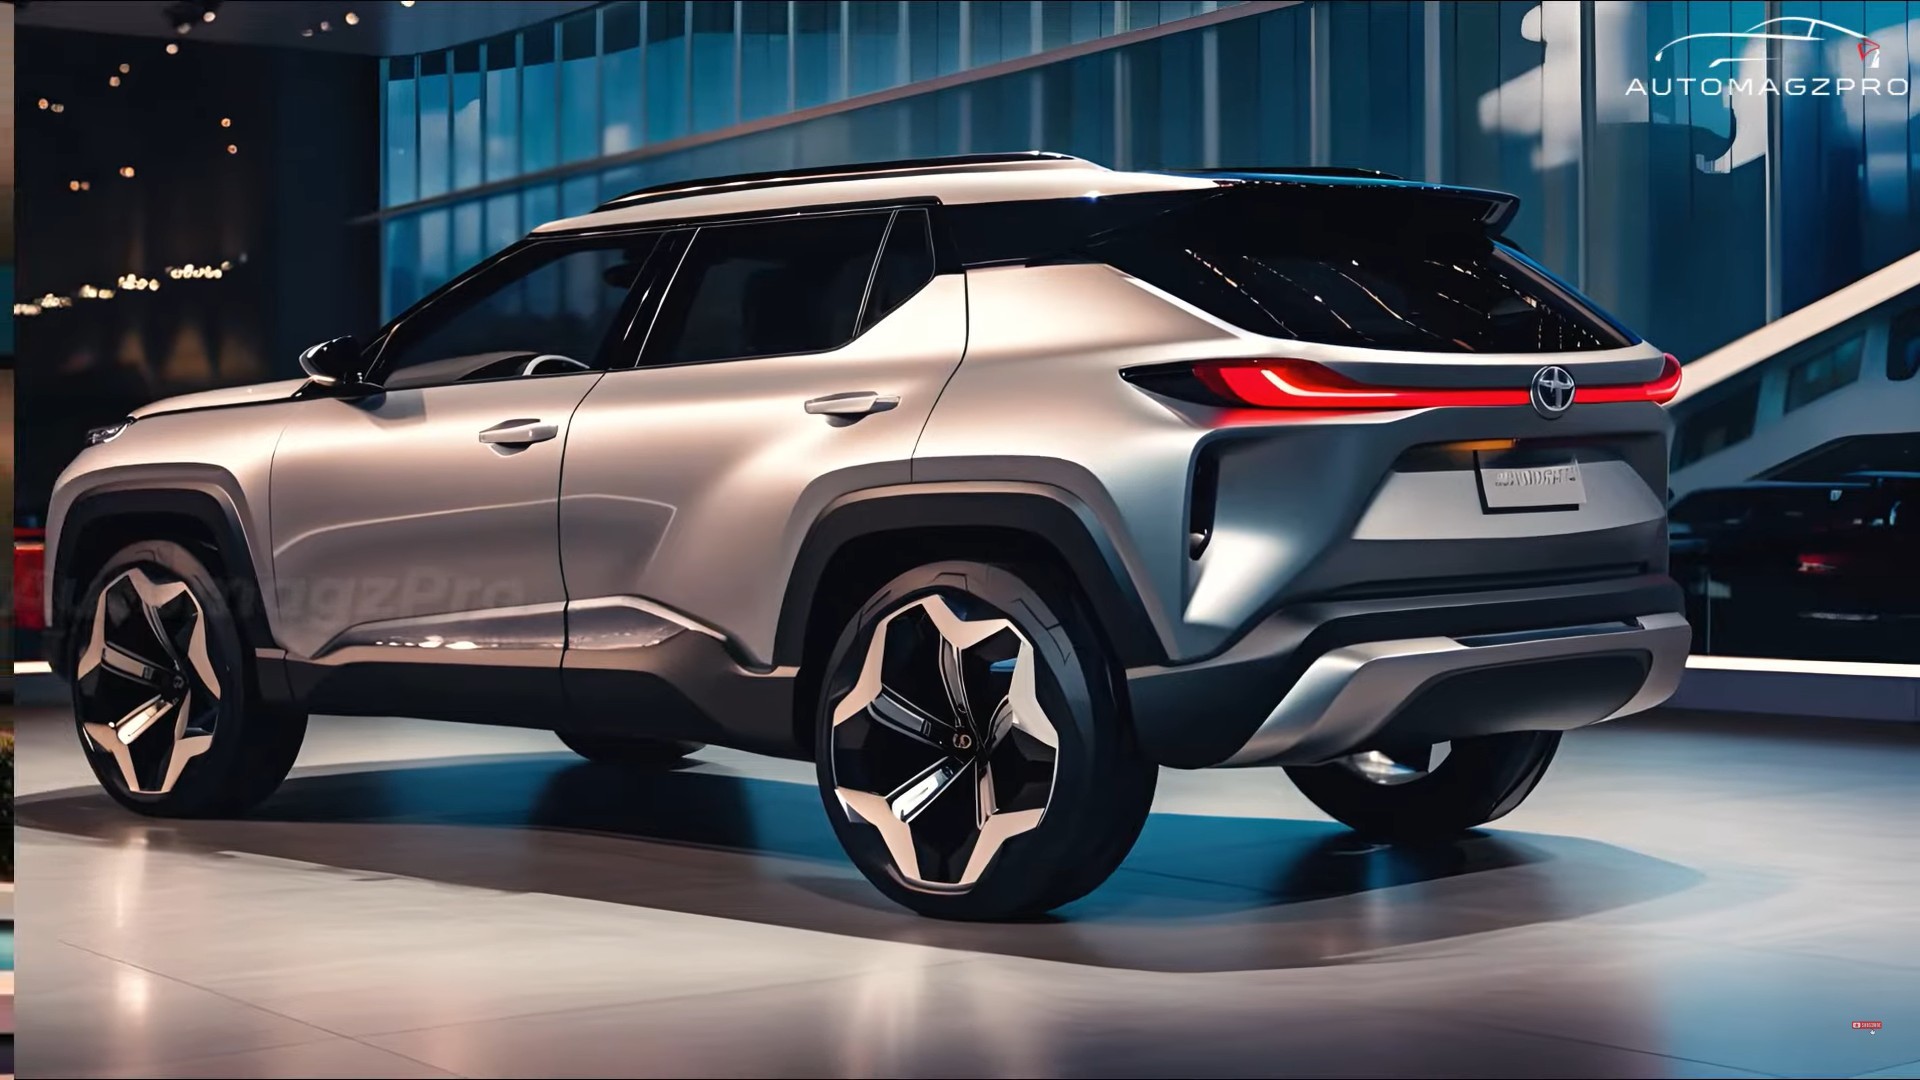 all-new-toyota-rav4-arrives-early-in-the-virtual-world-complete-with-ev-model-8.jpg